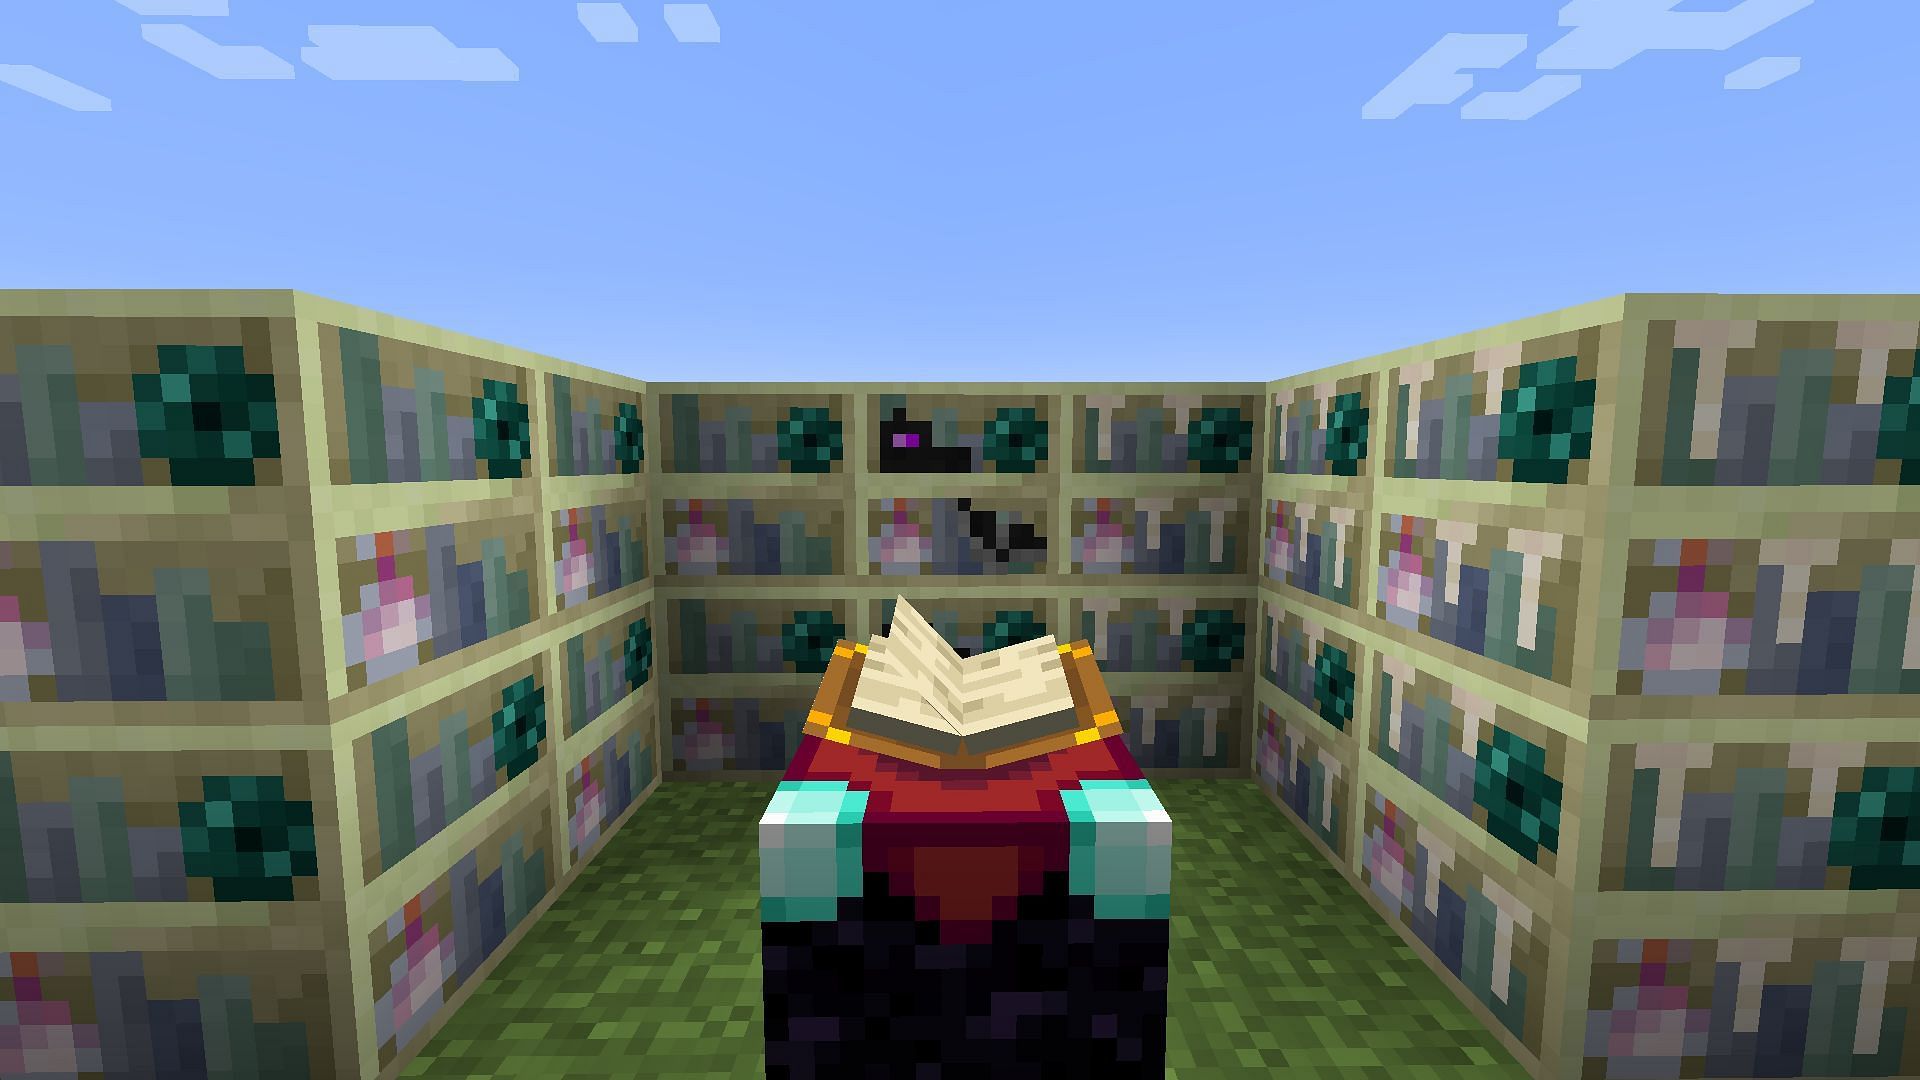 End-themed bookshelves in Apotheosis (Image via Shadows_of_Fire/CurseForge)